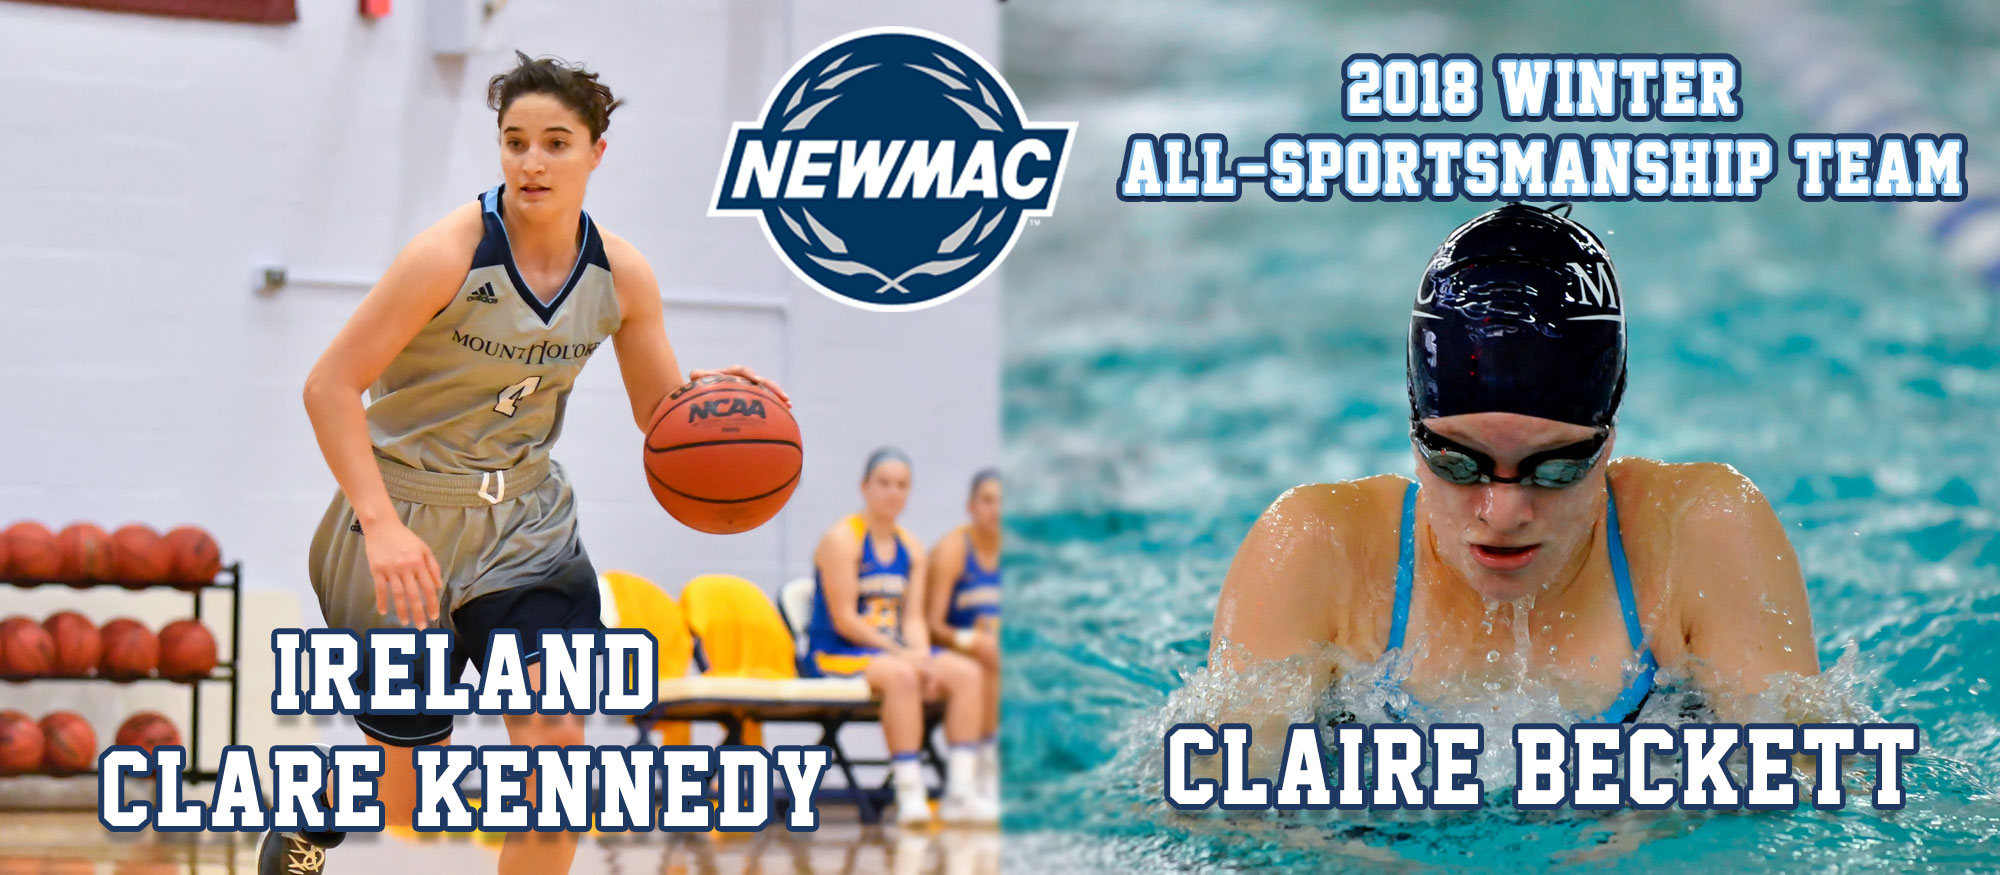 NEWMAC All-Sportsmanship graphic, featuring first year Ireland Clare Kennedy and senior Claire Beckett.